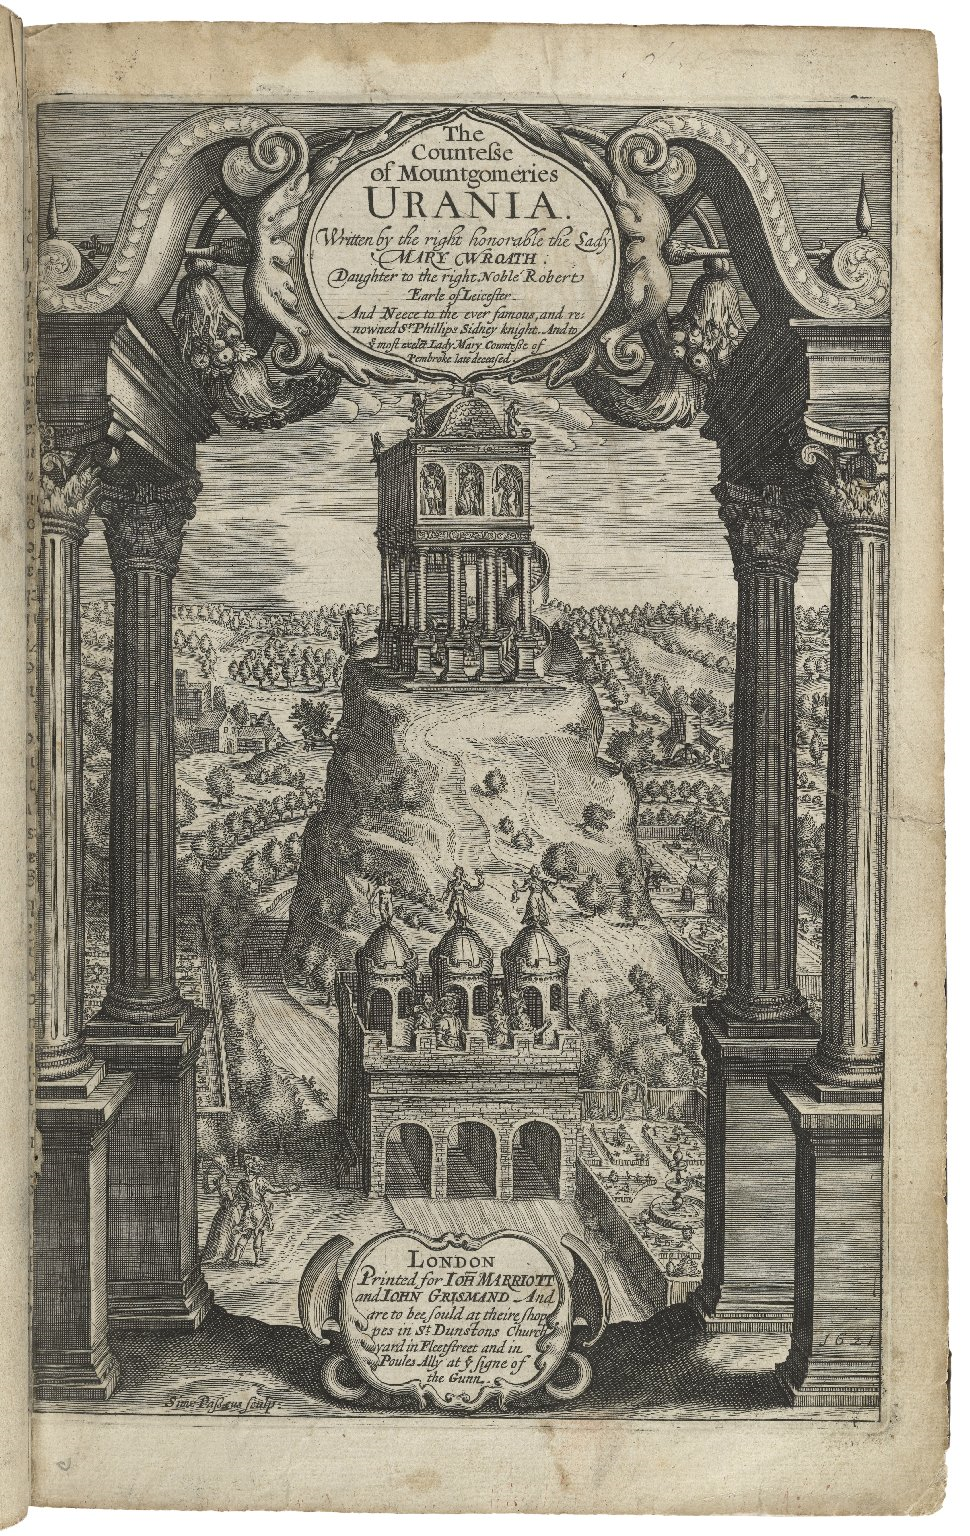 1621 Cover of Lady Mary Wroth’s “The Countesse of Mountgomeries Urania” depicting a city framed by colums.